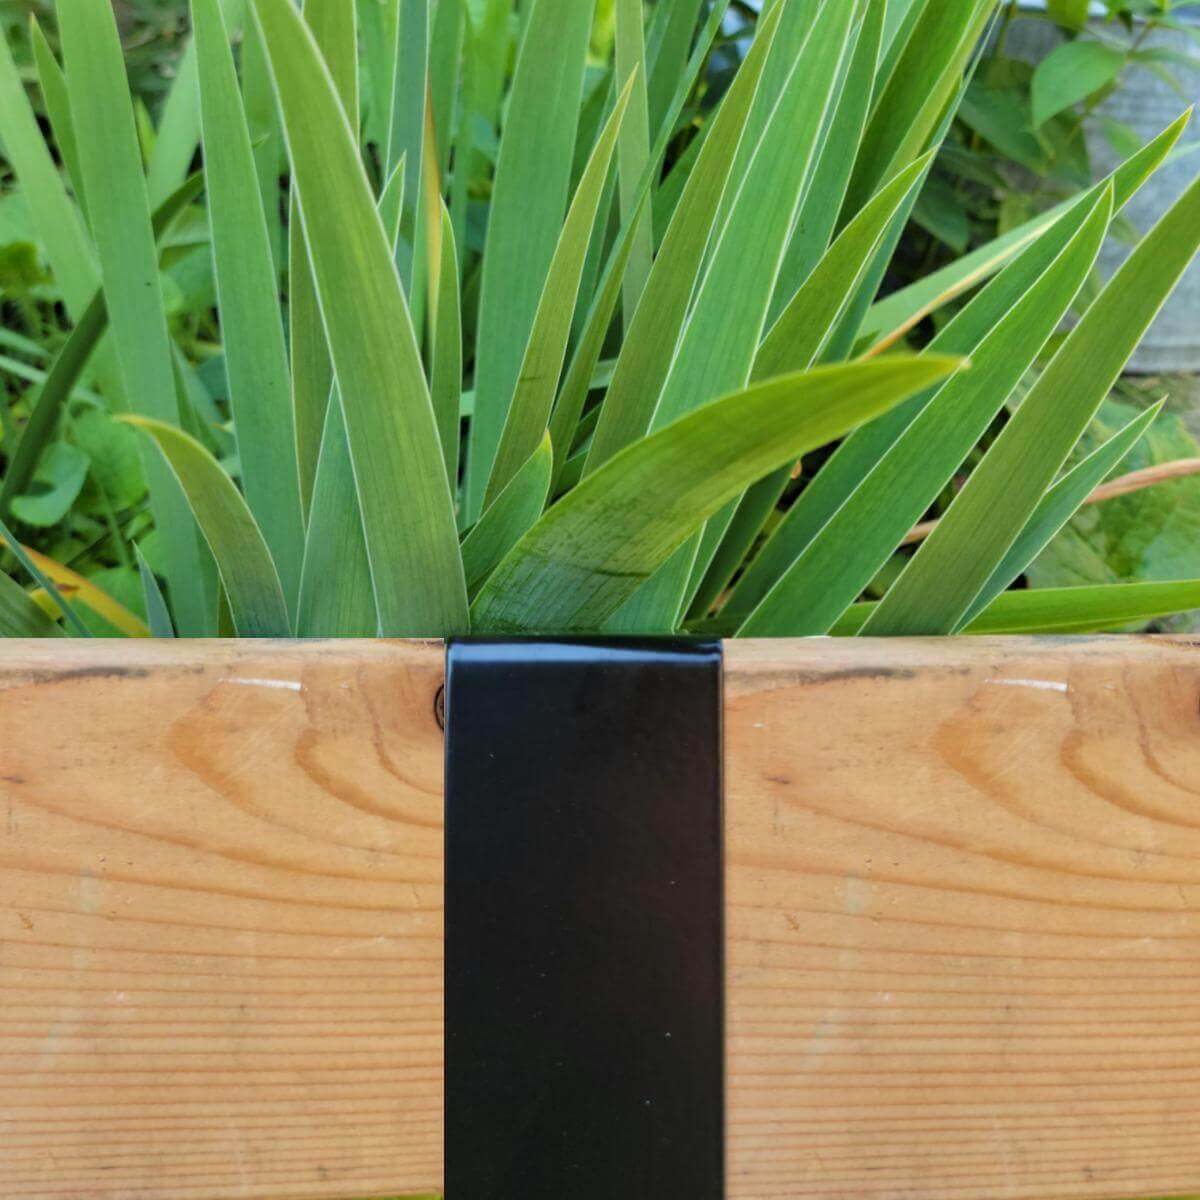 Satin black 2xEDGE staple installed on treated lumber to create flower bed with irises.